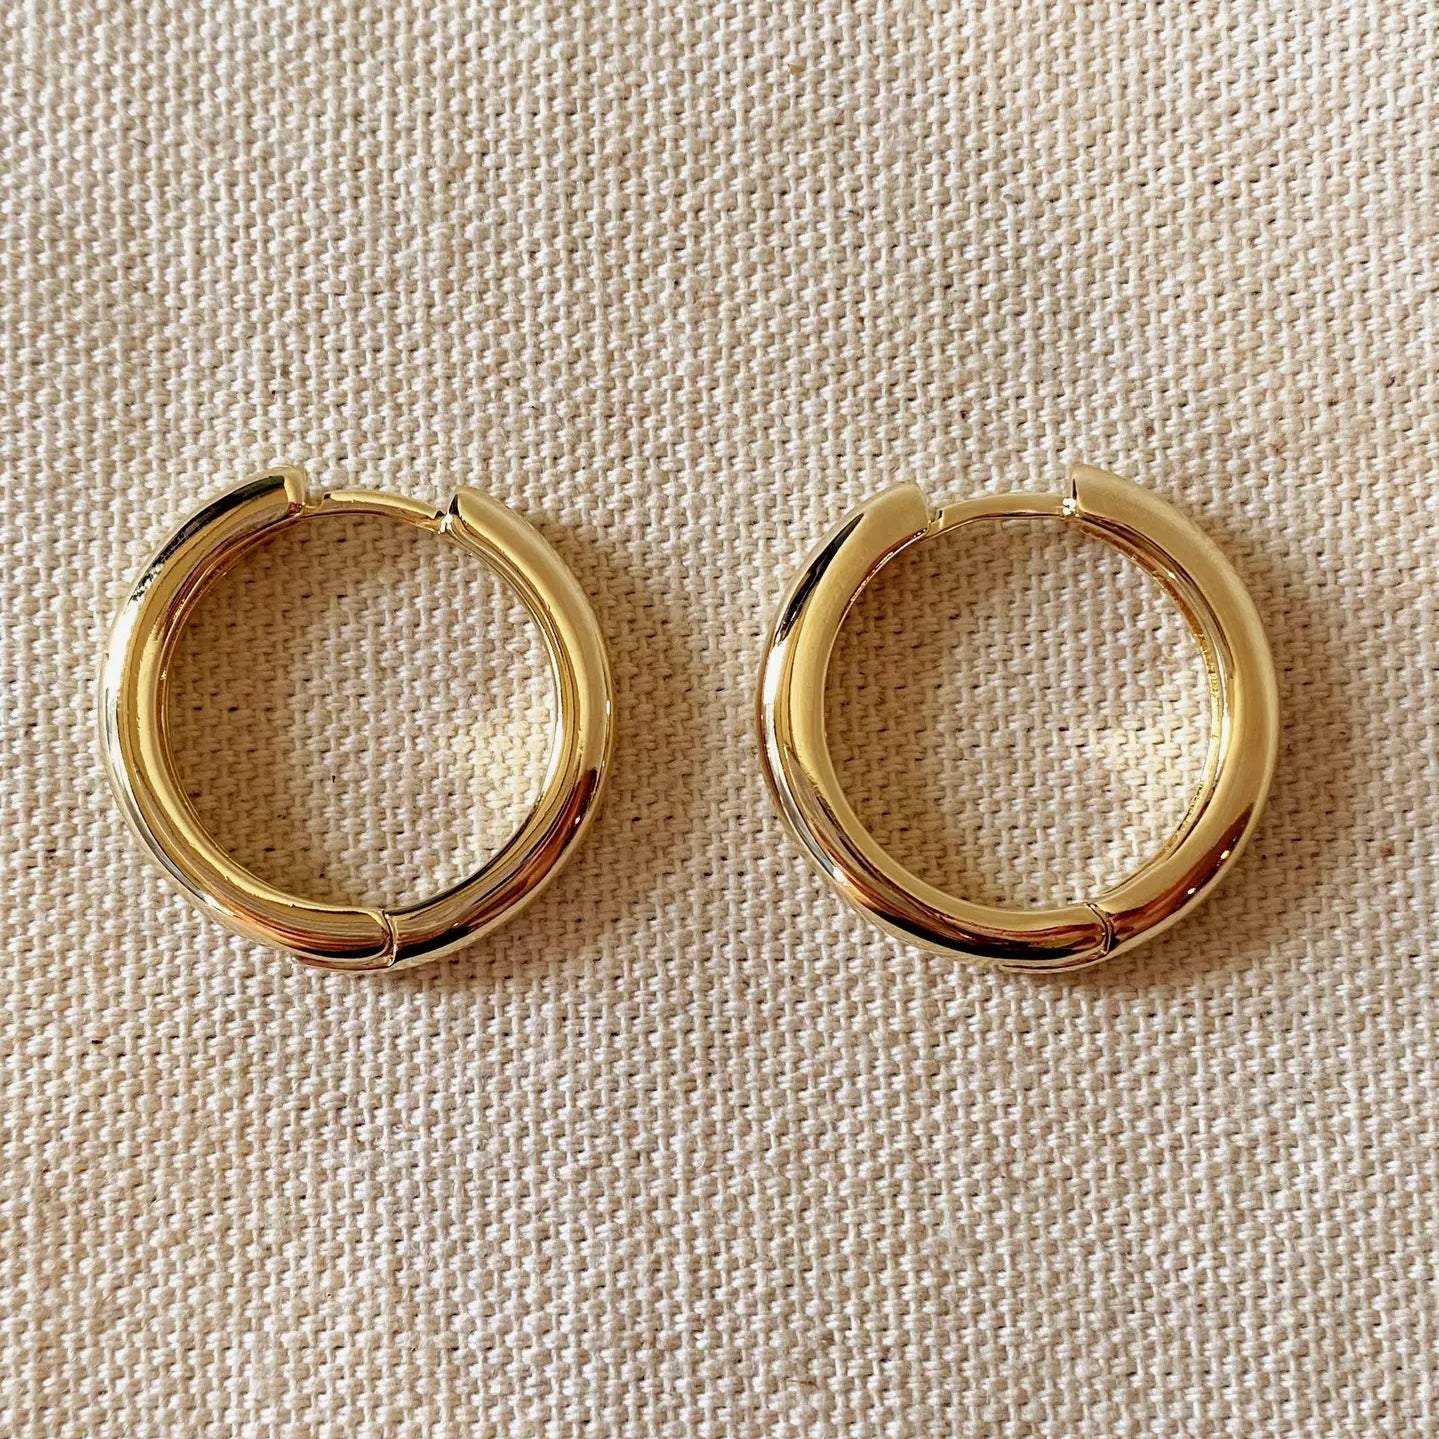 chunky-hoop-earrings-gold-filled-polished-clicker-